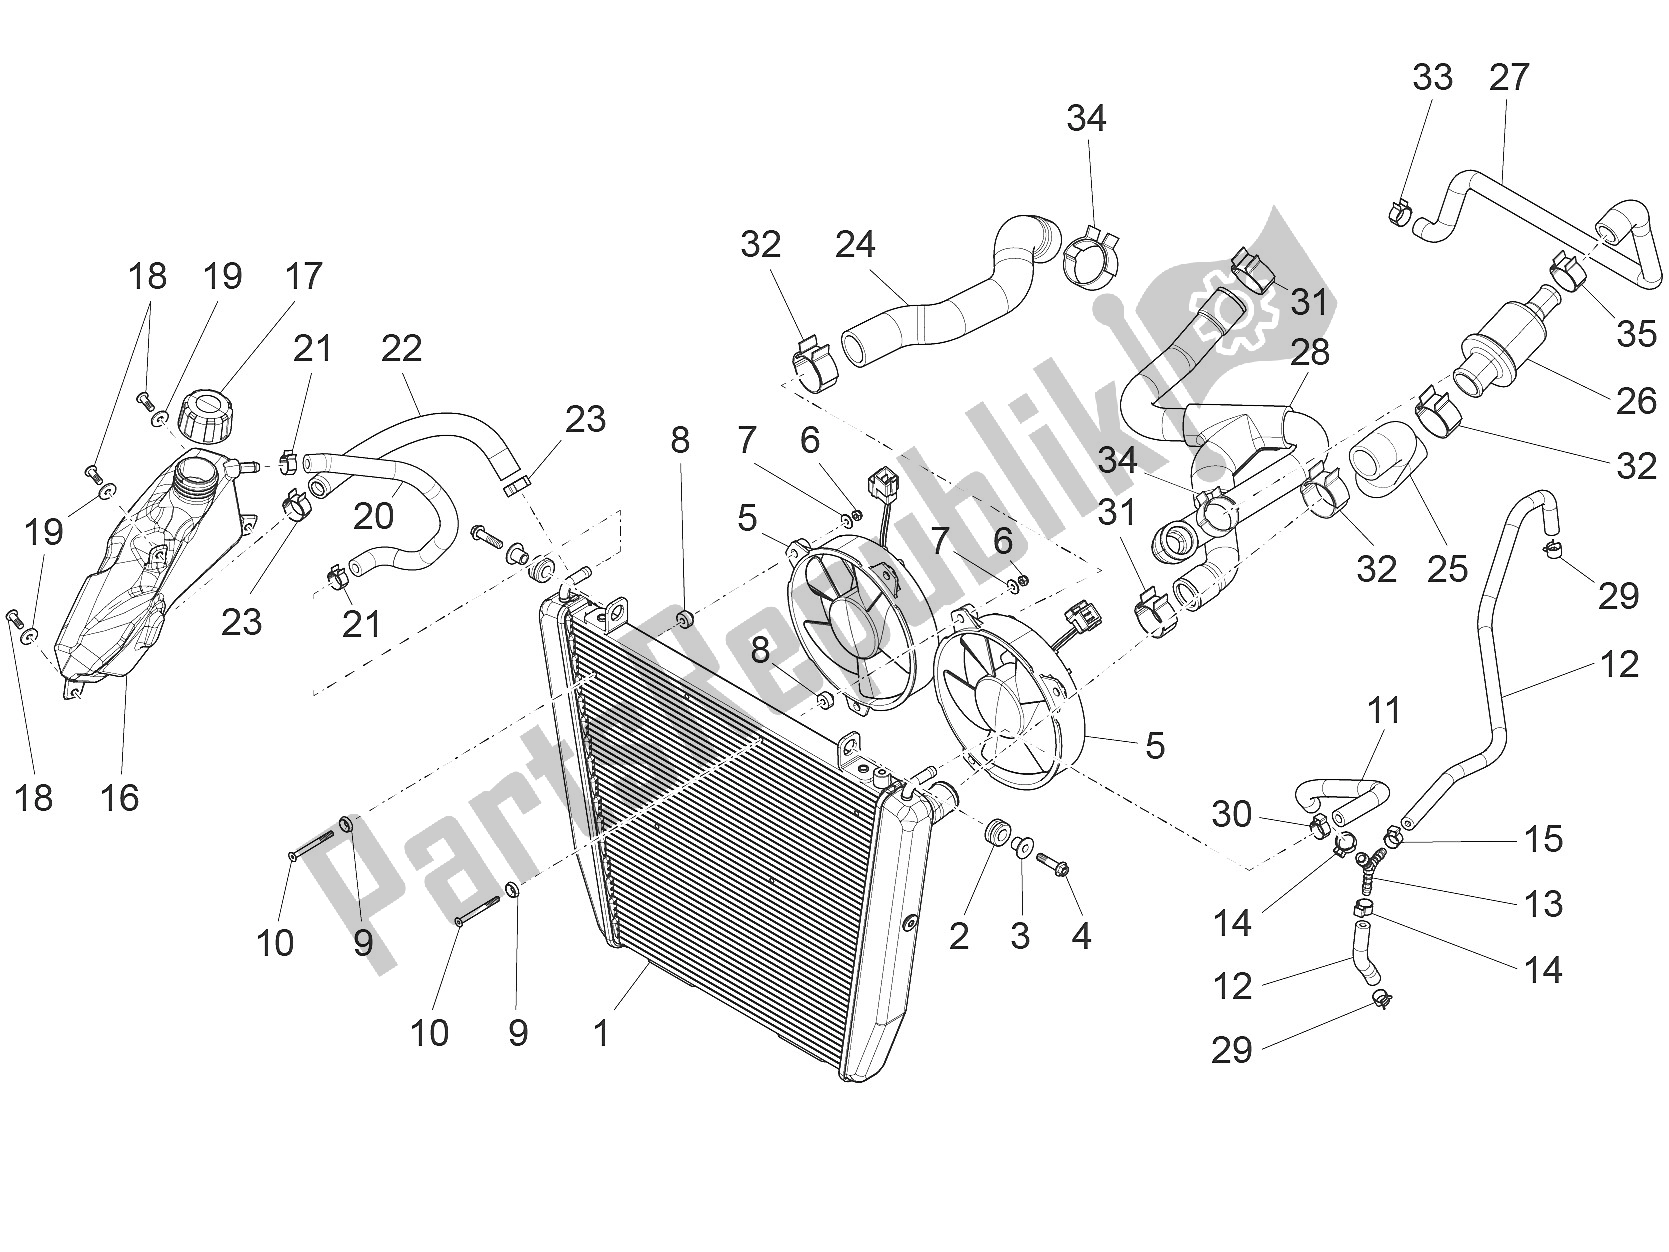 All parts for the Cooling System of the Aprilia Caponord 1200 USA 2015